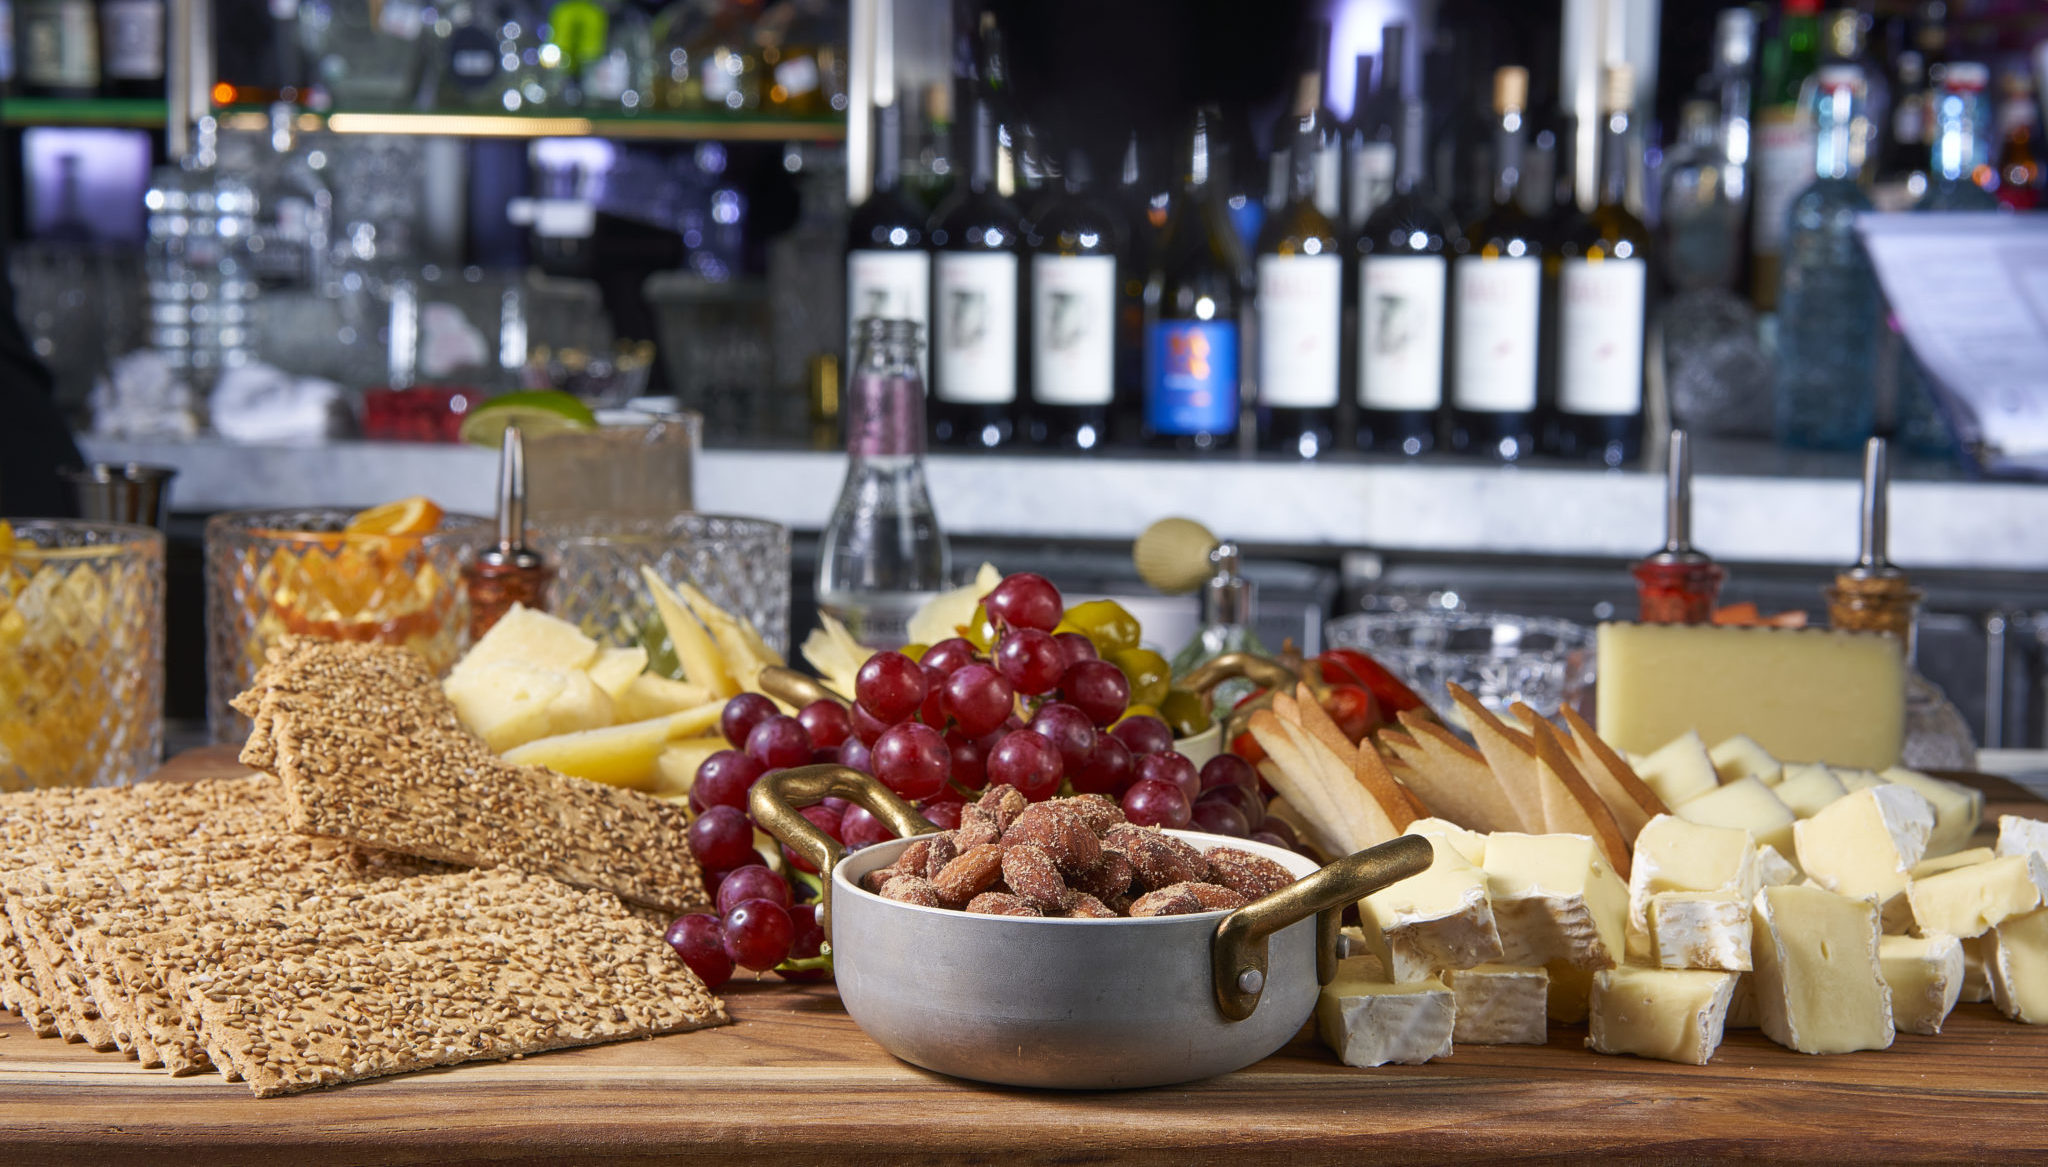 Charcuterie board with crackers, grapes, cheese, and almonds.